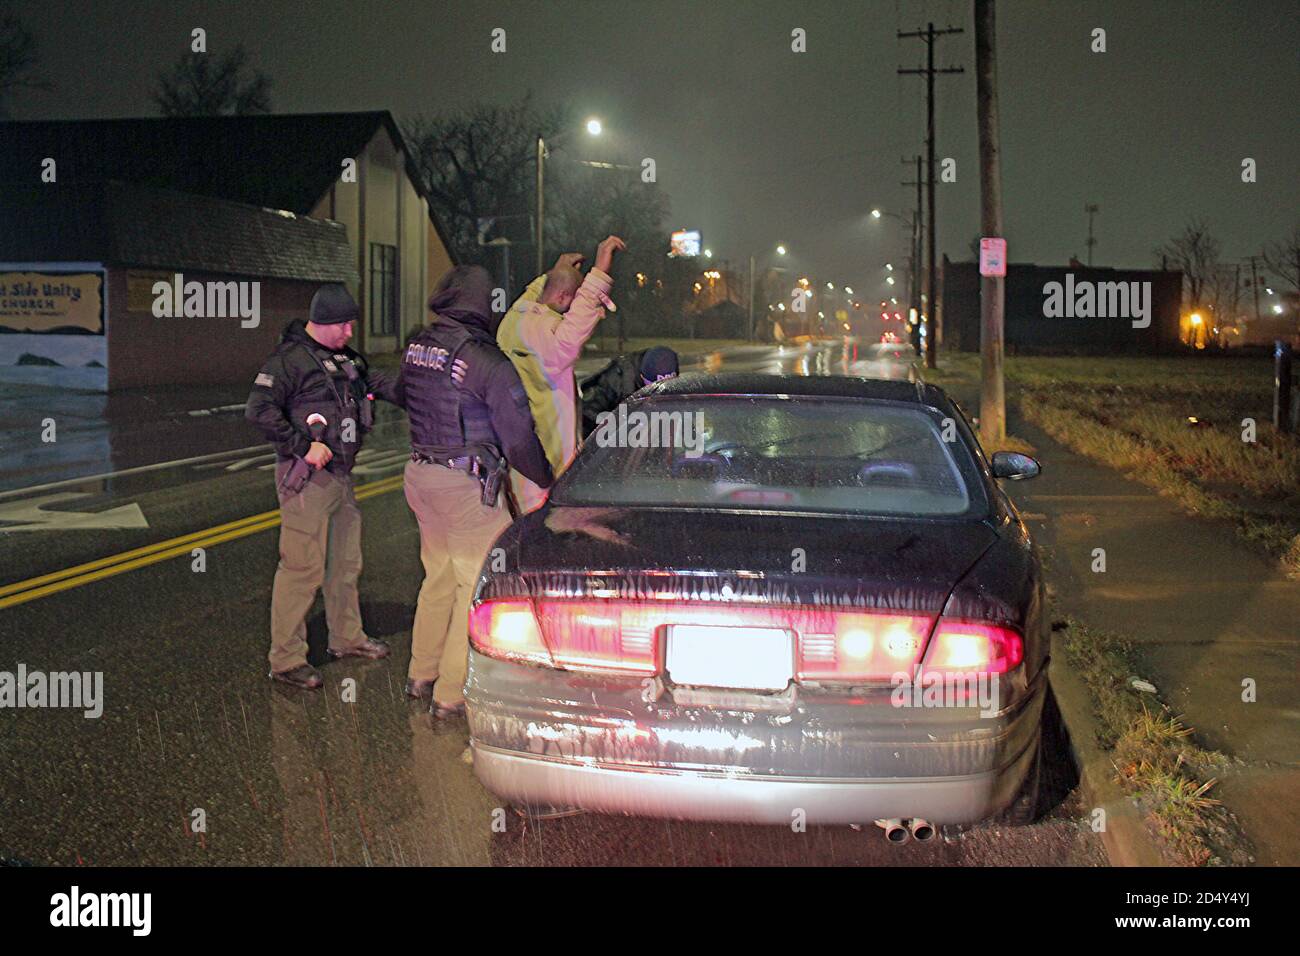 Detroit police officers detain a man and search his vehicle at night, Detroit, Michigan, USA Stock Photo